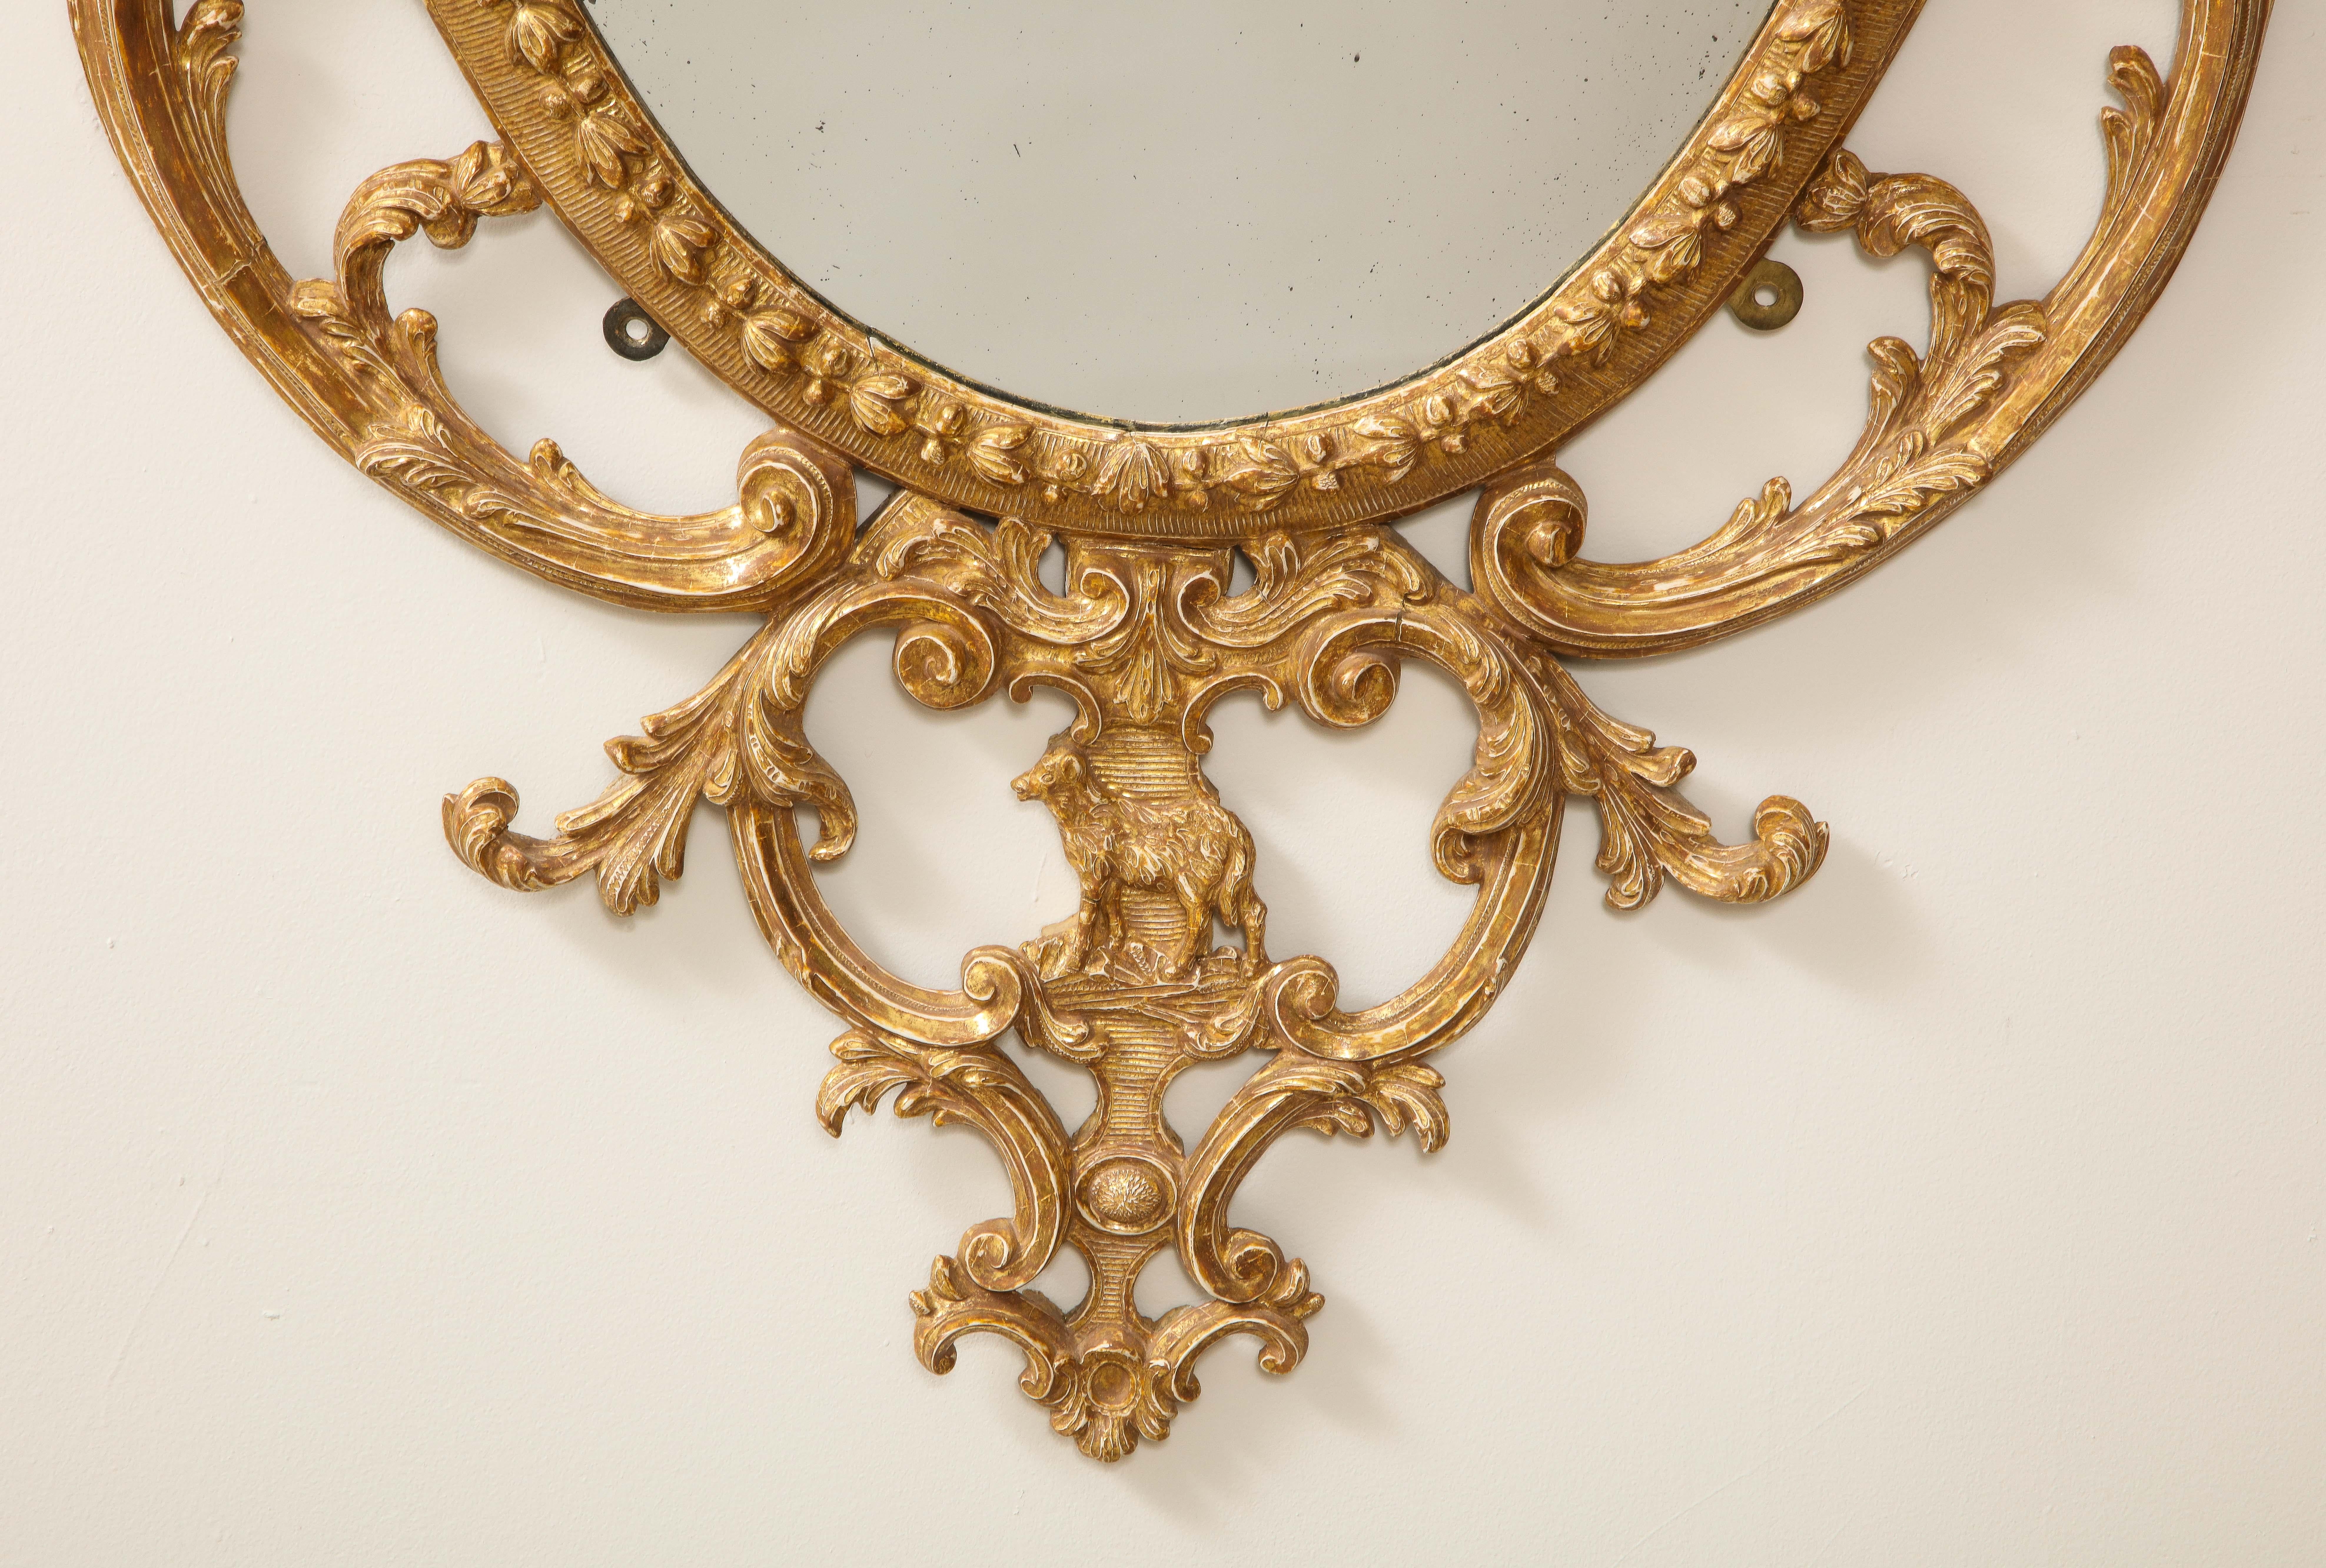 Late 18th Century Pr. George III Gilt Carton-Pierre and Giltwood Oval Mirrors, Manner John Linnell For Sale